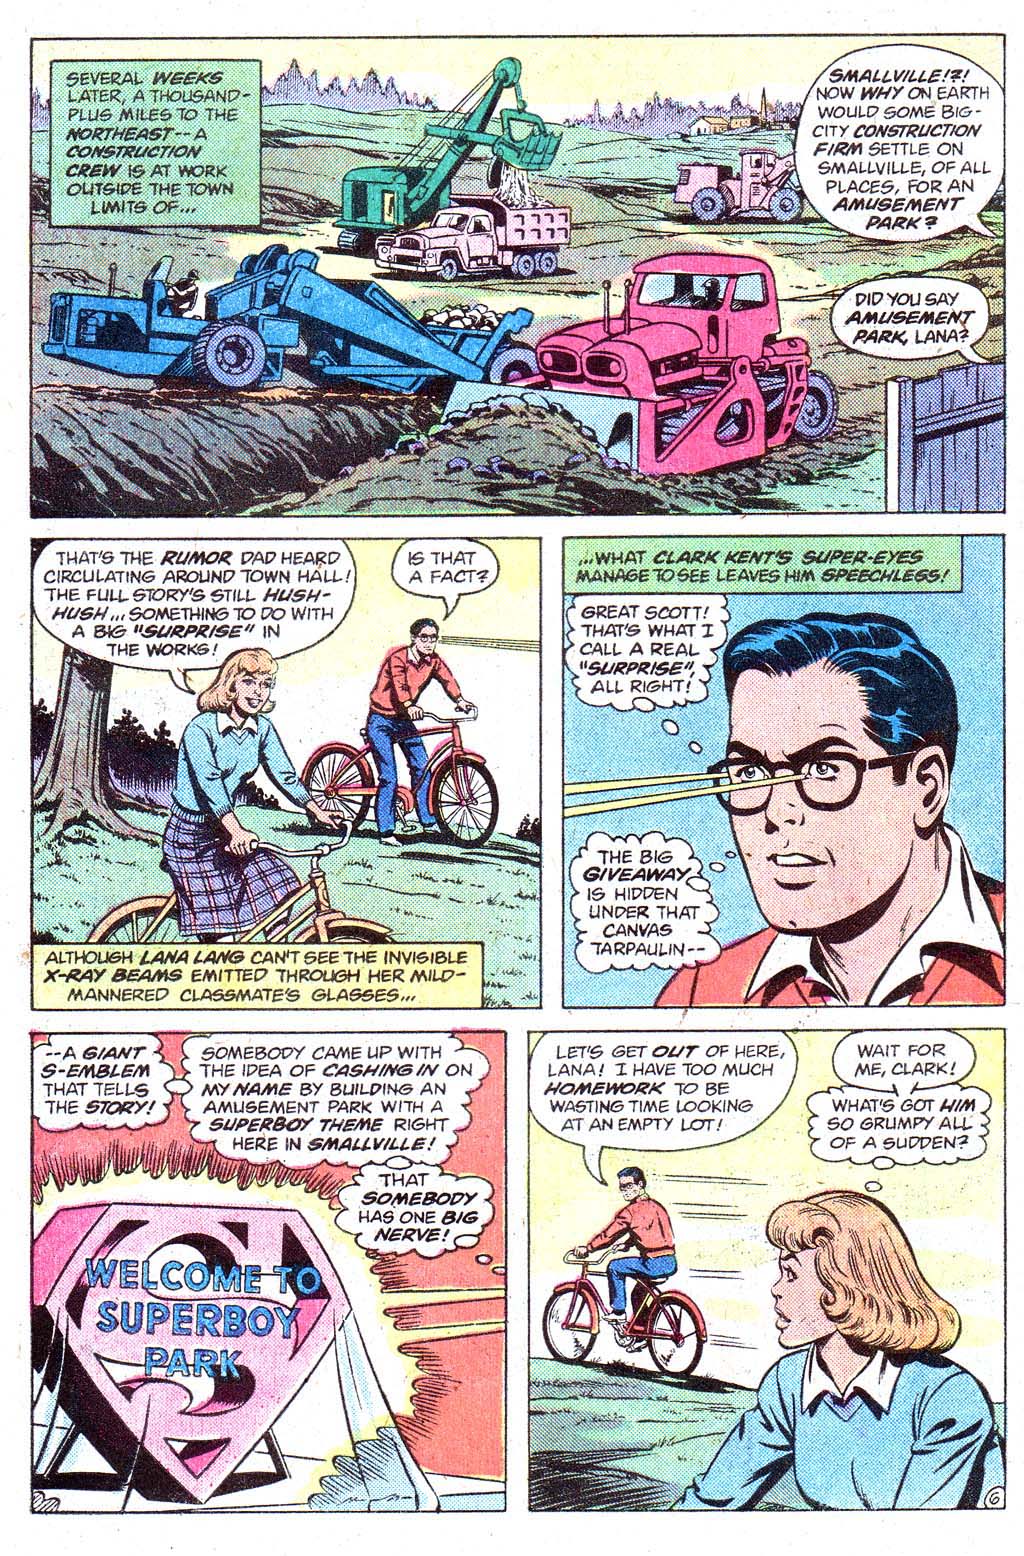 The New Adventures of Superboy 29 Page 9